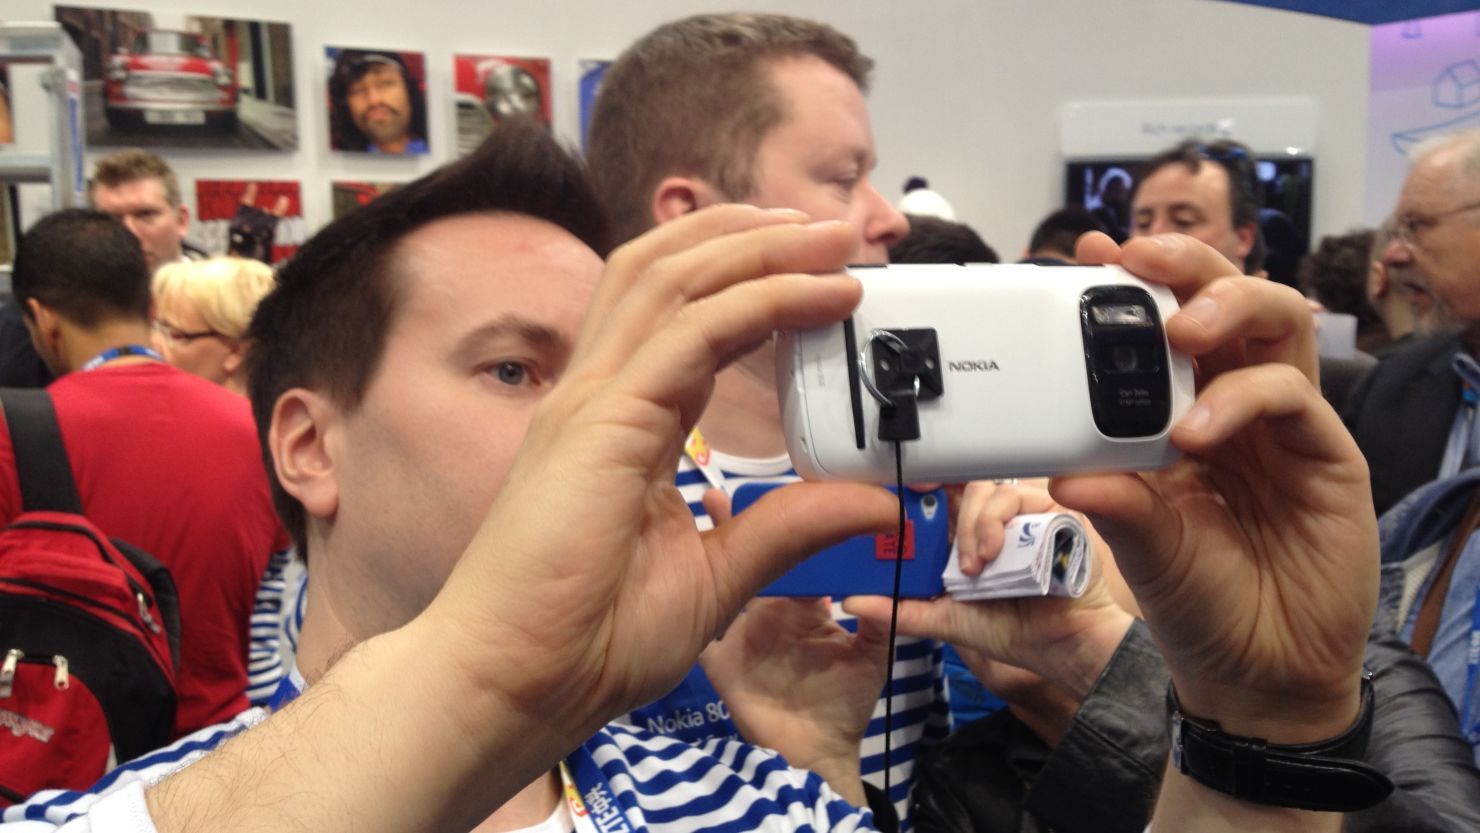 A participant at the Mobile World Congress in Barcelona tries out Nokia's PureView smartphone, February 27, 2012.